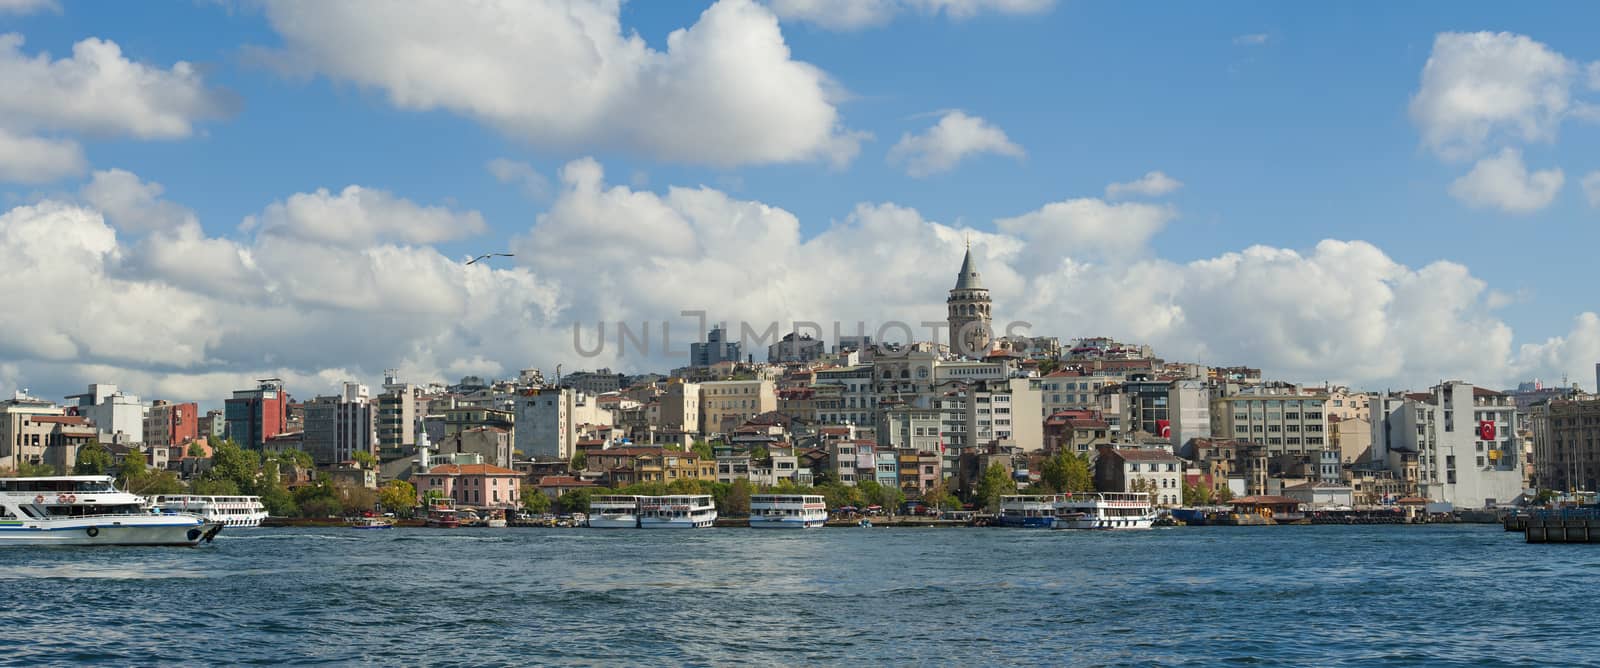 Panoramic cityscape over the Bosphorus River in Istanbul Turkey with a large residential area and Galata Tower